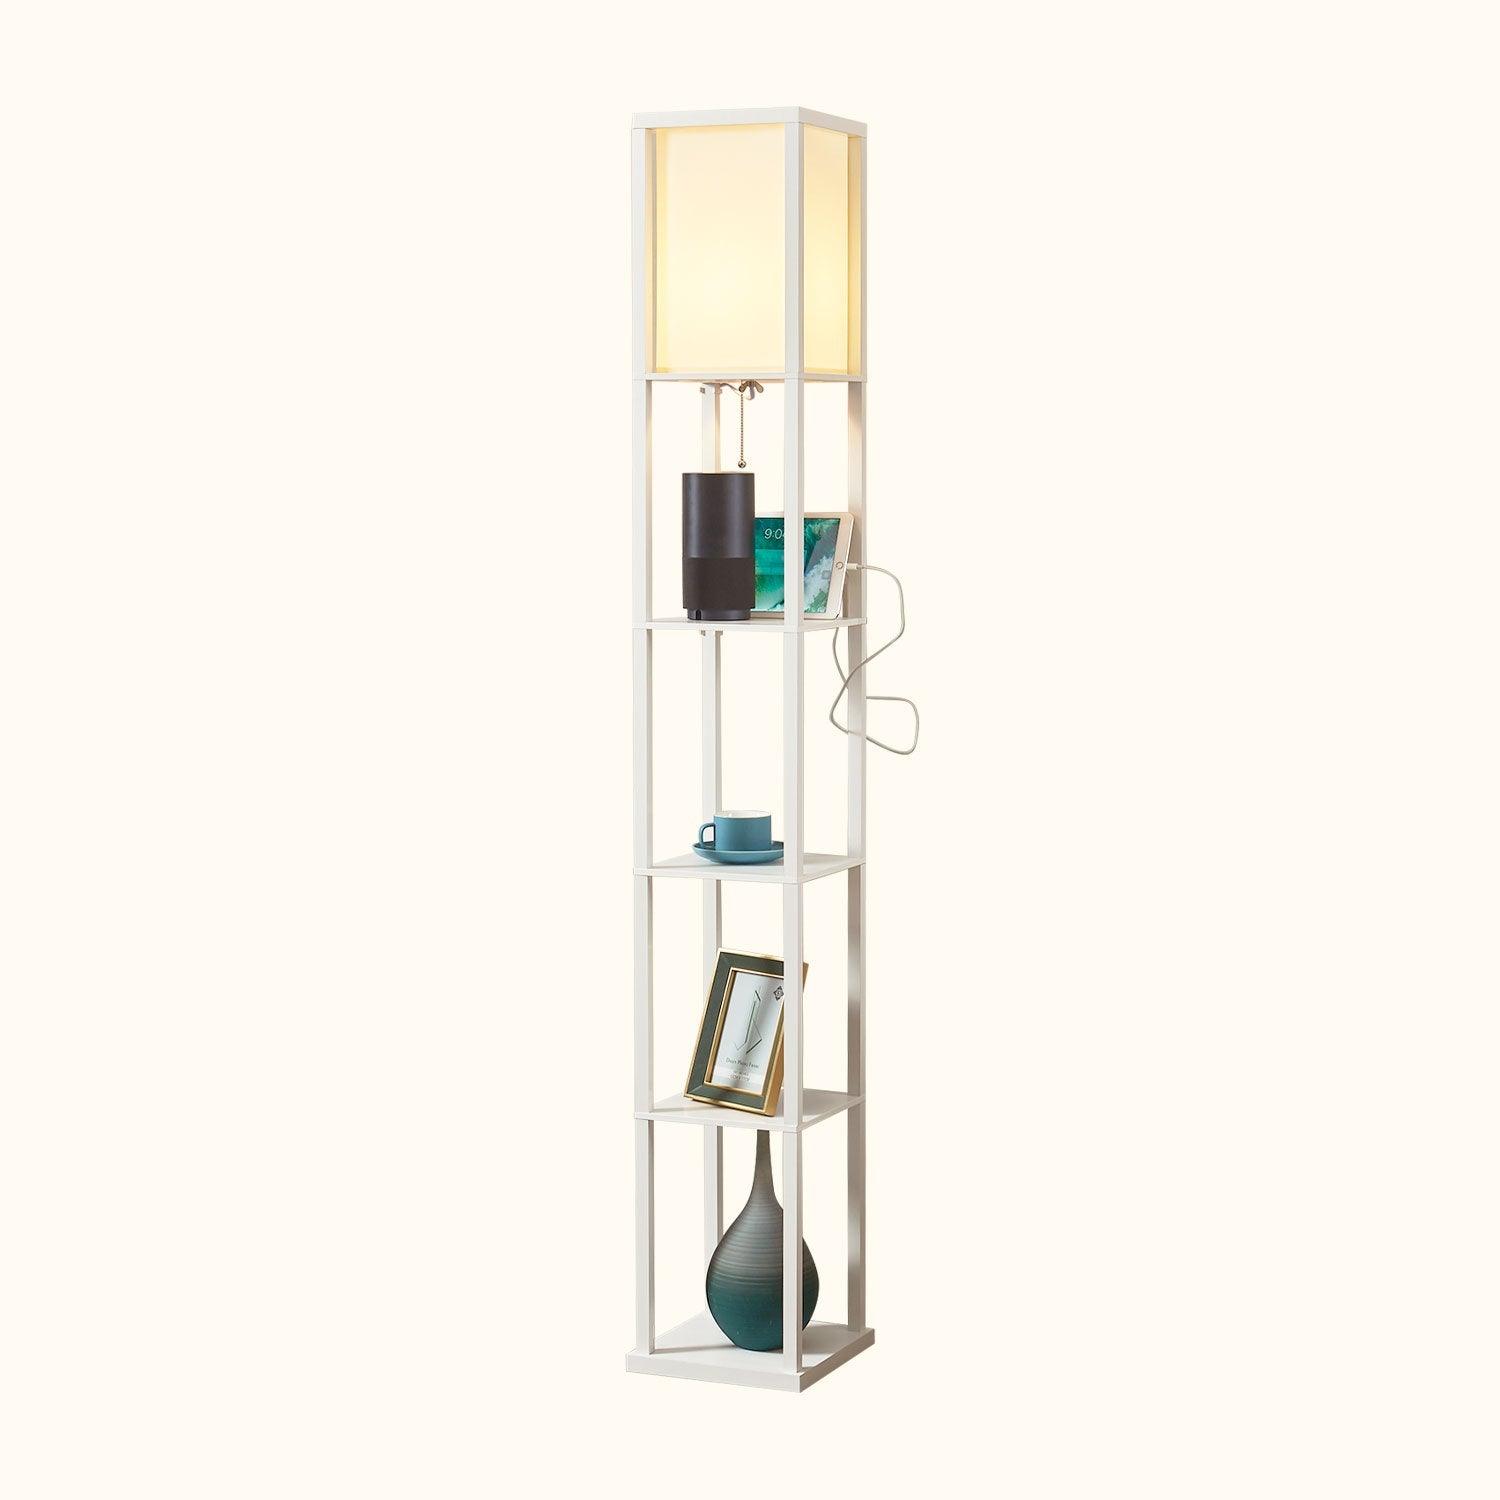 ATAMIN Avery Advanced 72" Floor Lamp With Shelves & USB-C Charging Station